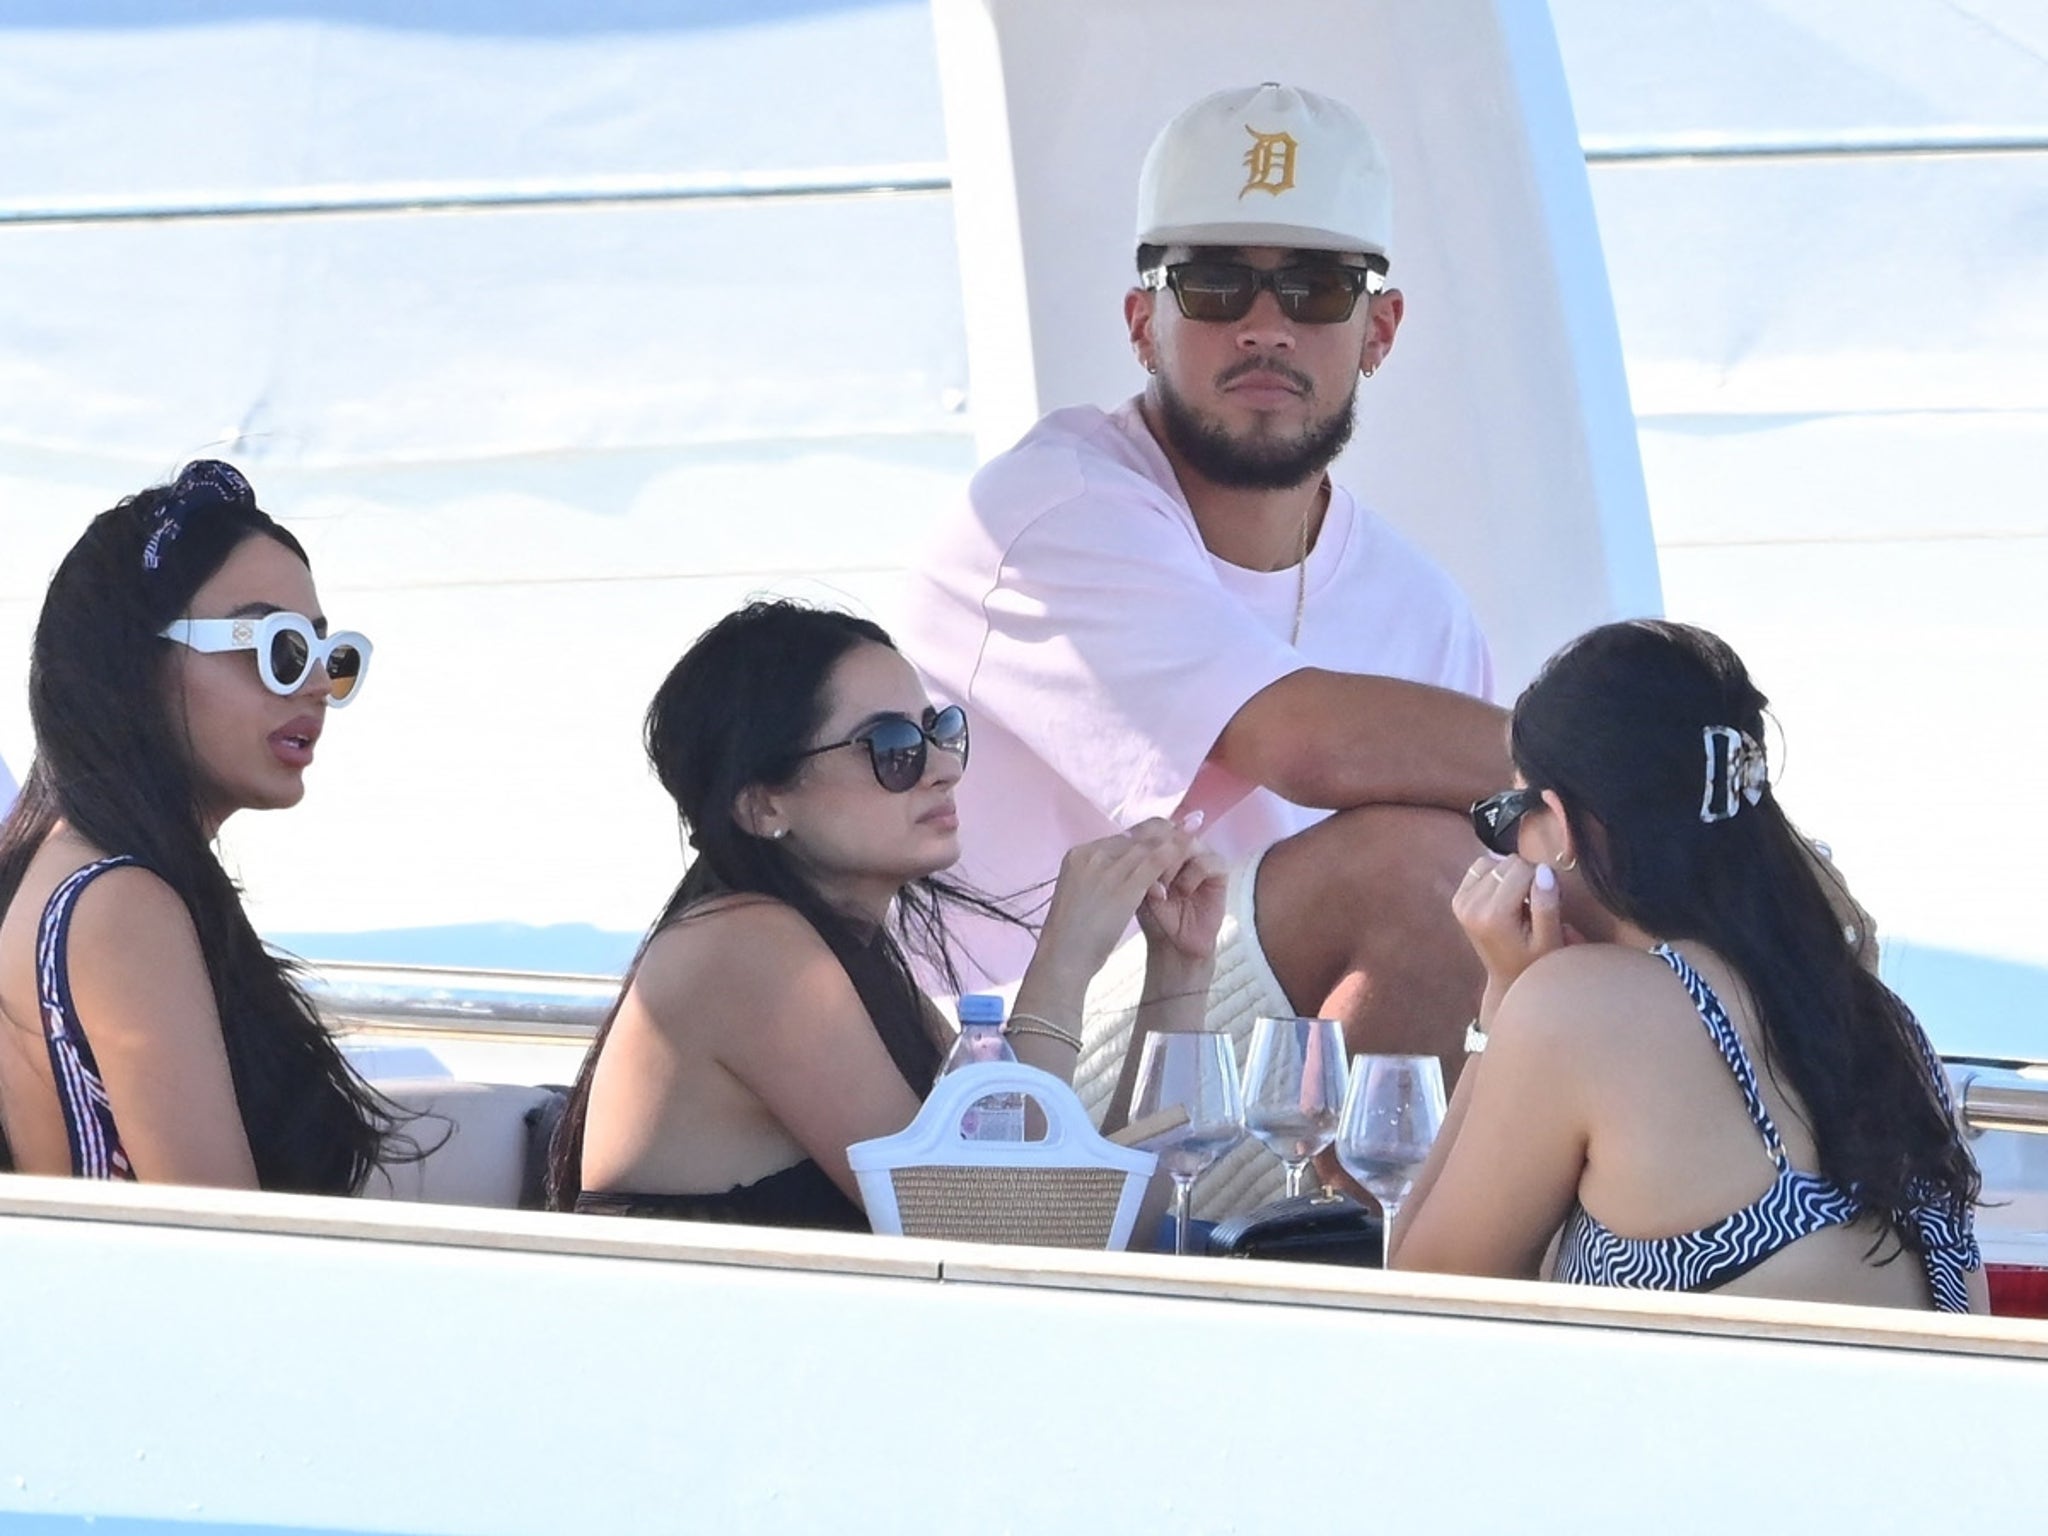 Devin Booker Parties On Yacht With Bikini-Clad Girls